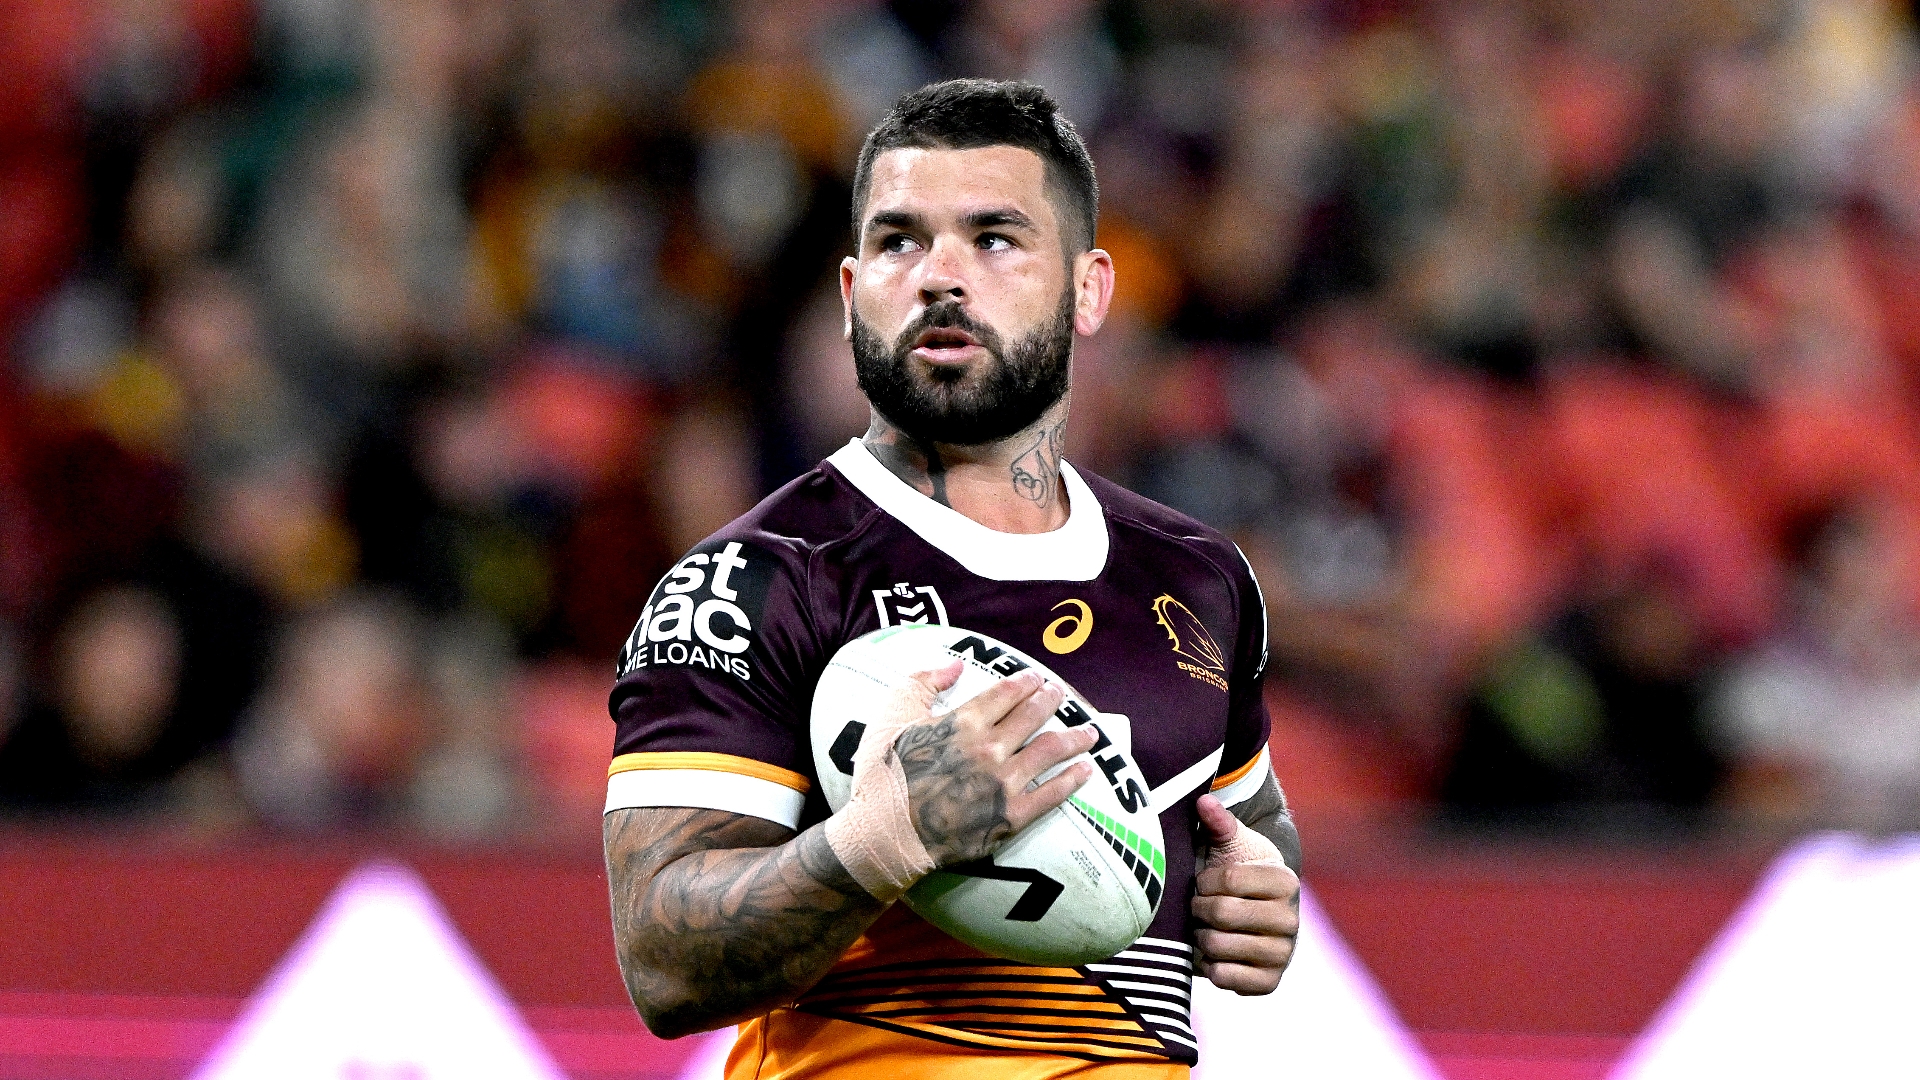 Manly Sea Eagles vs Brisbane Broncos Tips & Preview Broncos to put on